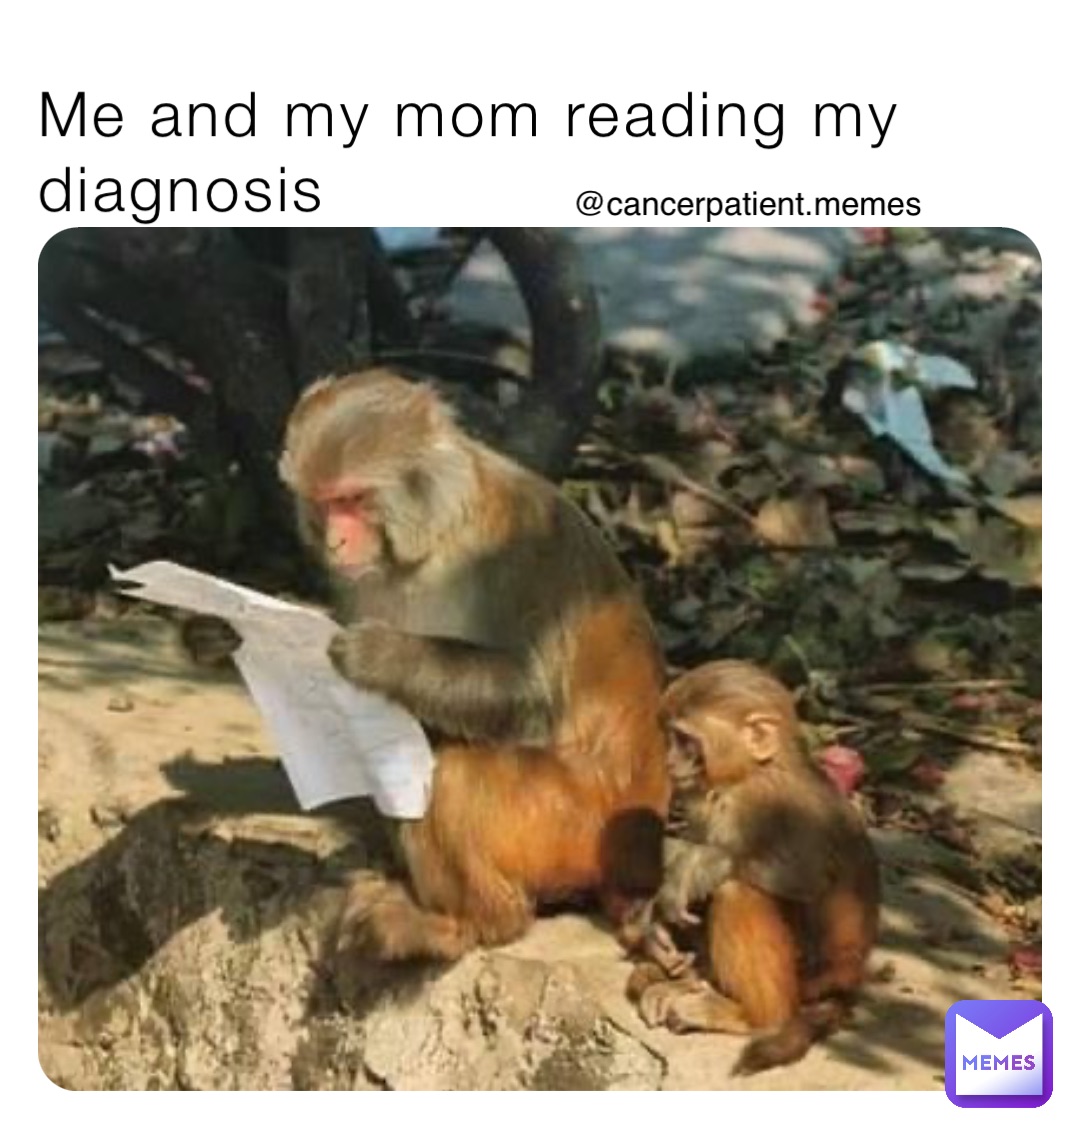 Me and my mom reading my diagnosis @cancerpatient.memes